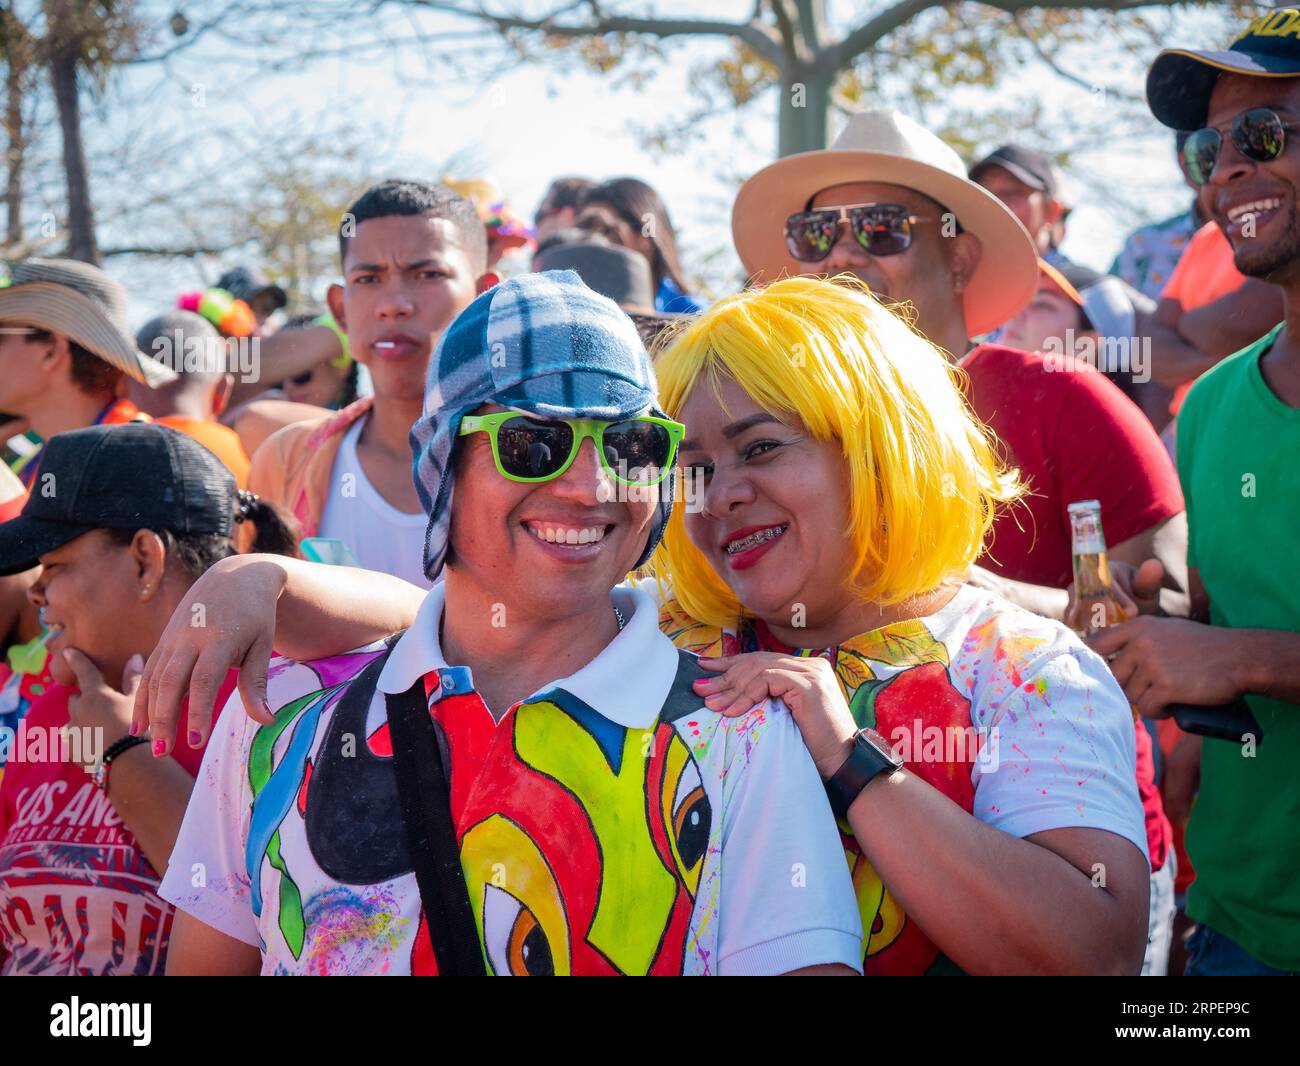 Barranquilla, Atlantico, Colombia - February 18 2023: Colombian Man Wearing a Colorful T-shirt, Glasses  and Cap Stands next to a Woman Wearing a Yell Stock Photo